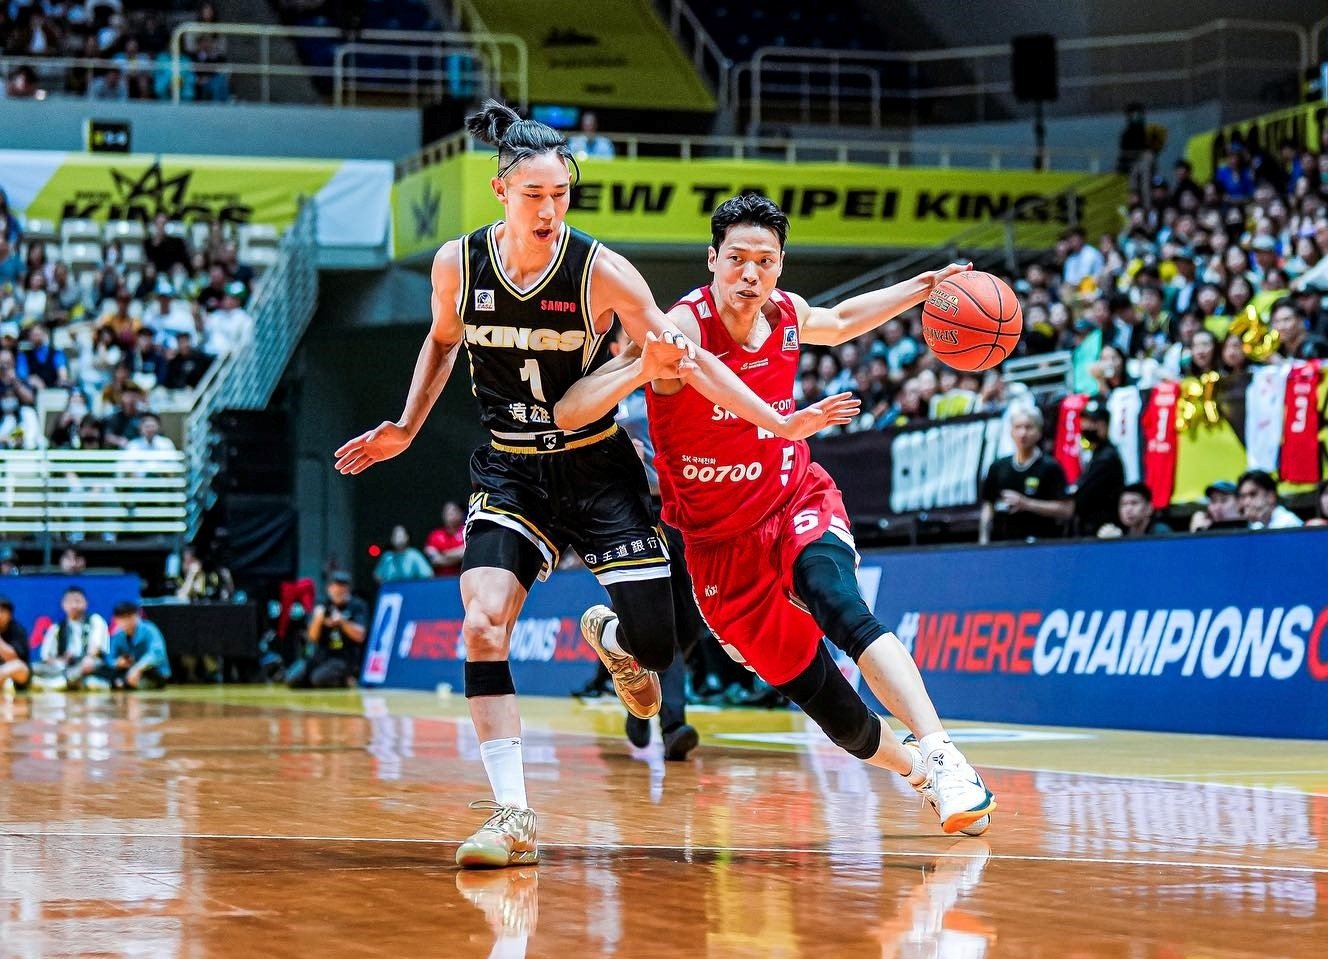 Joseph Lin (left) chipped in 21 points to help the Kings defeat the Knights. Photo: Handout